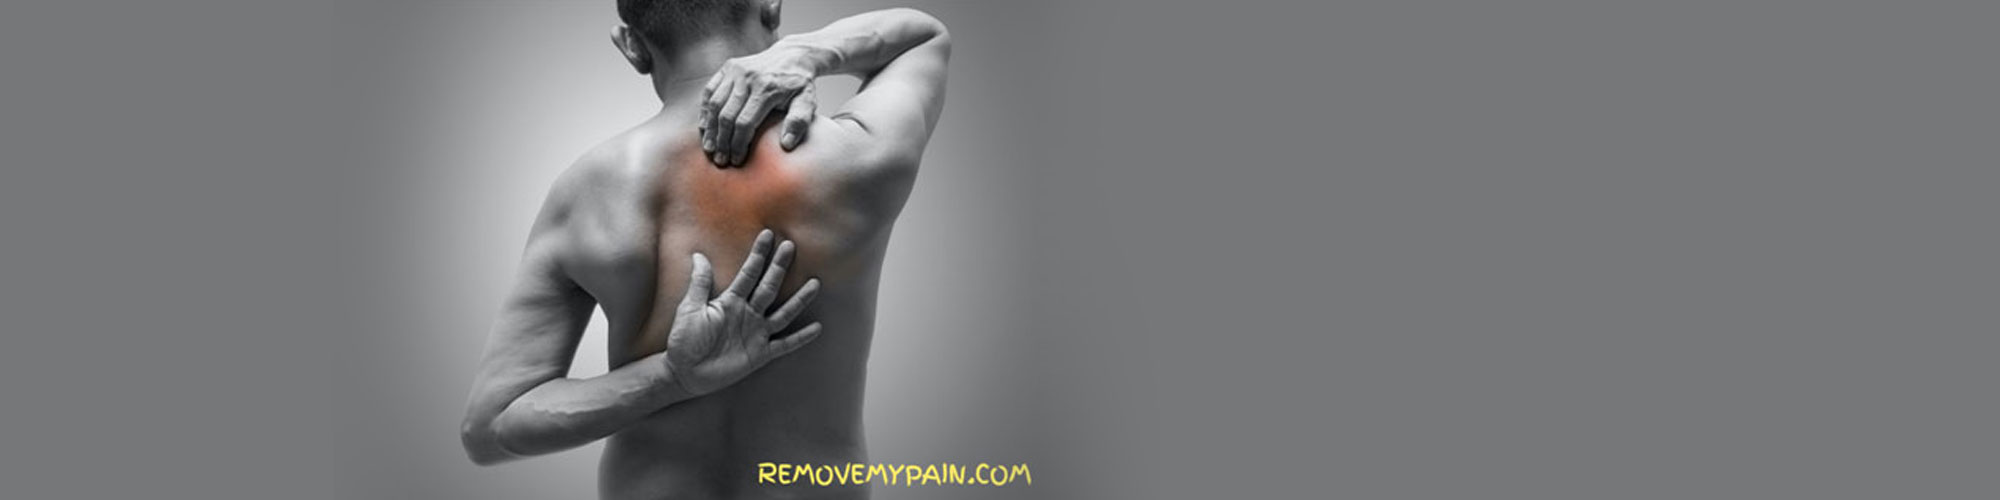 Thoracic spine treatment in Delhi, Chest wall pain treatment in Delhi